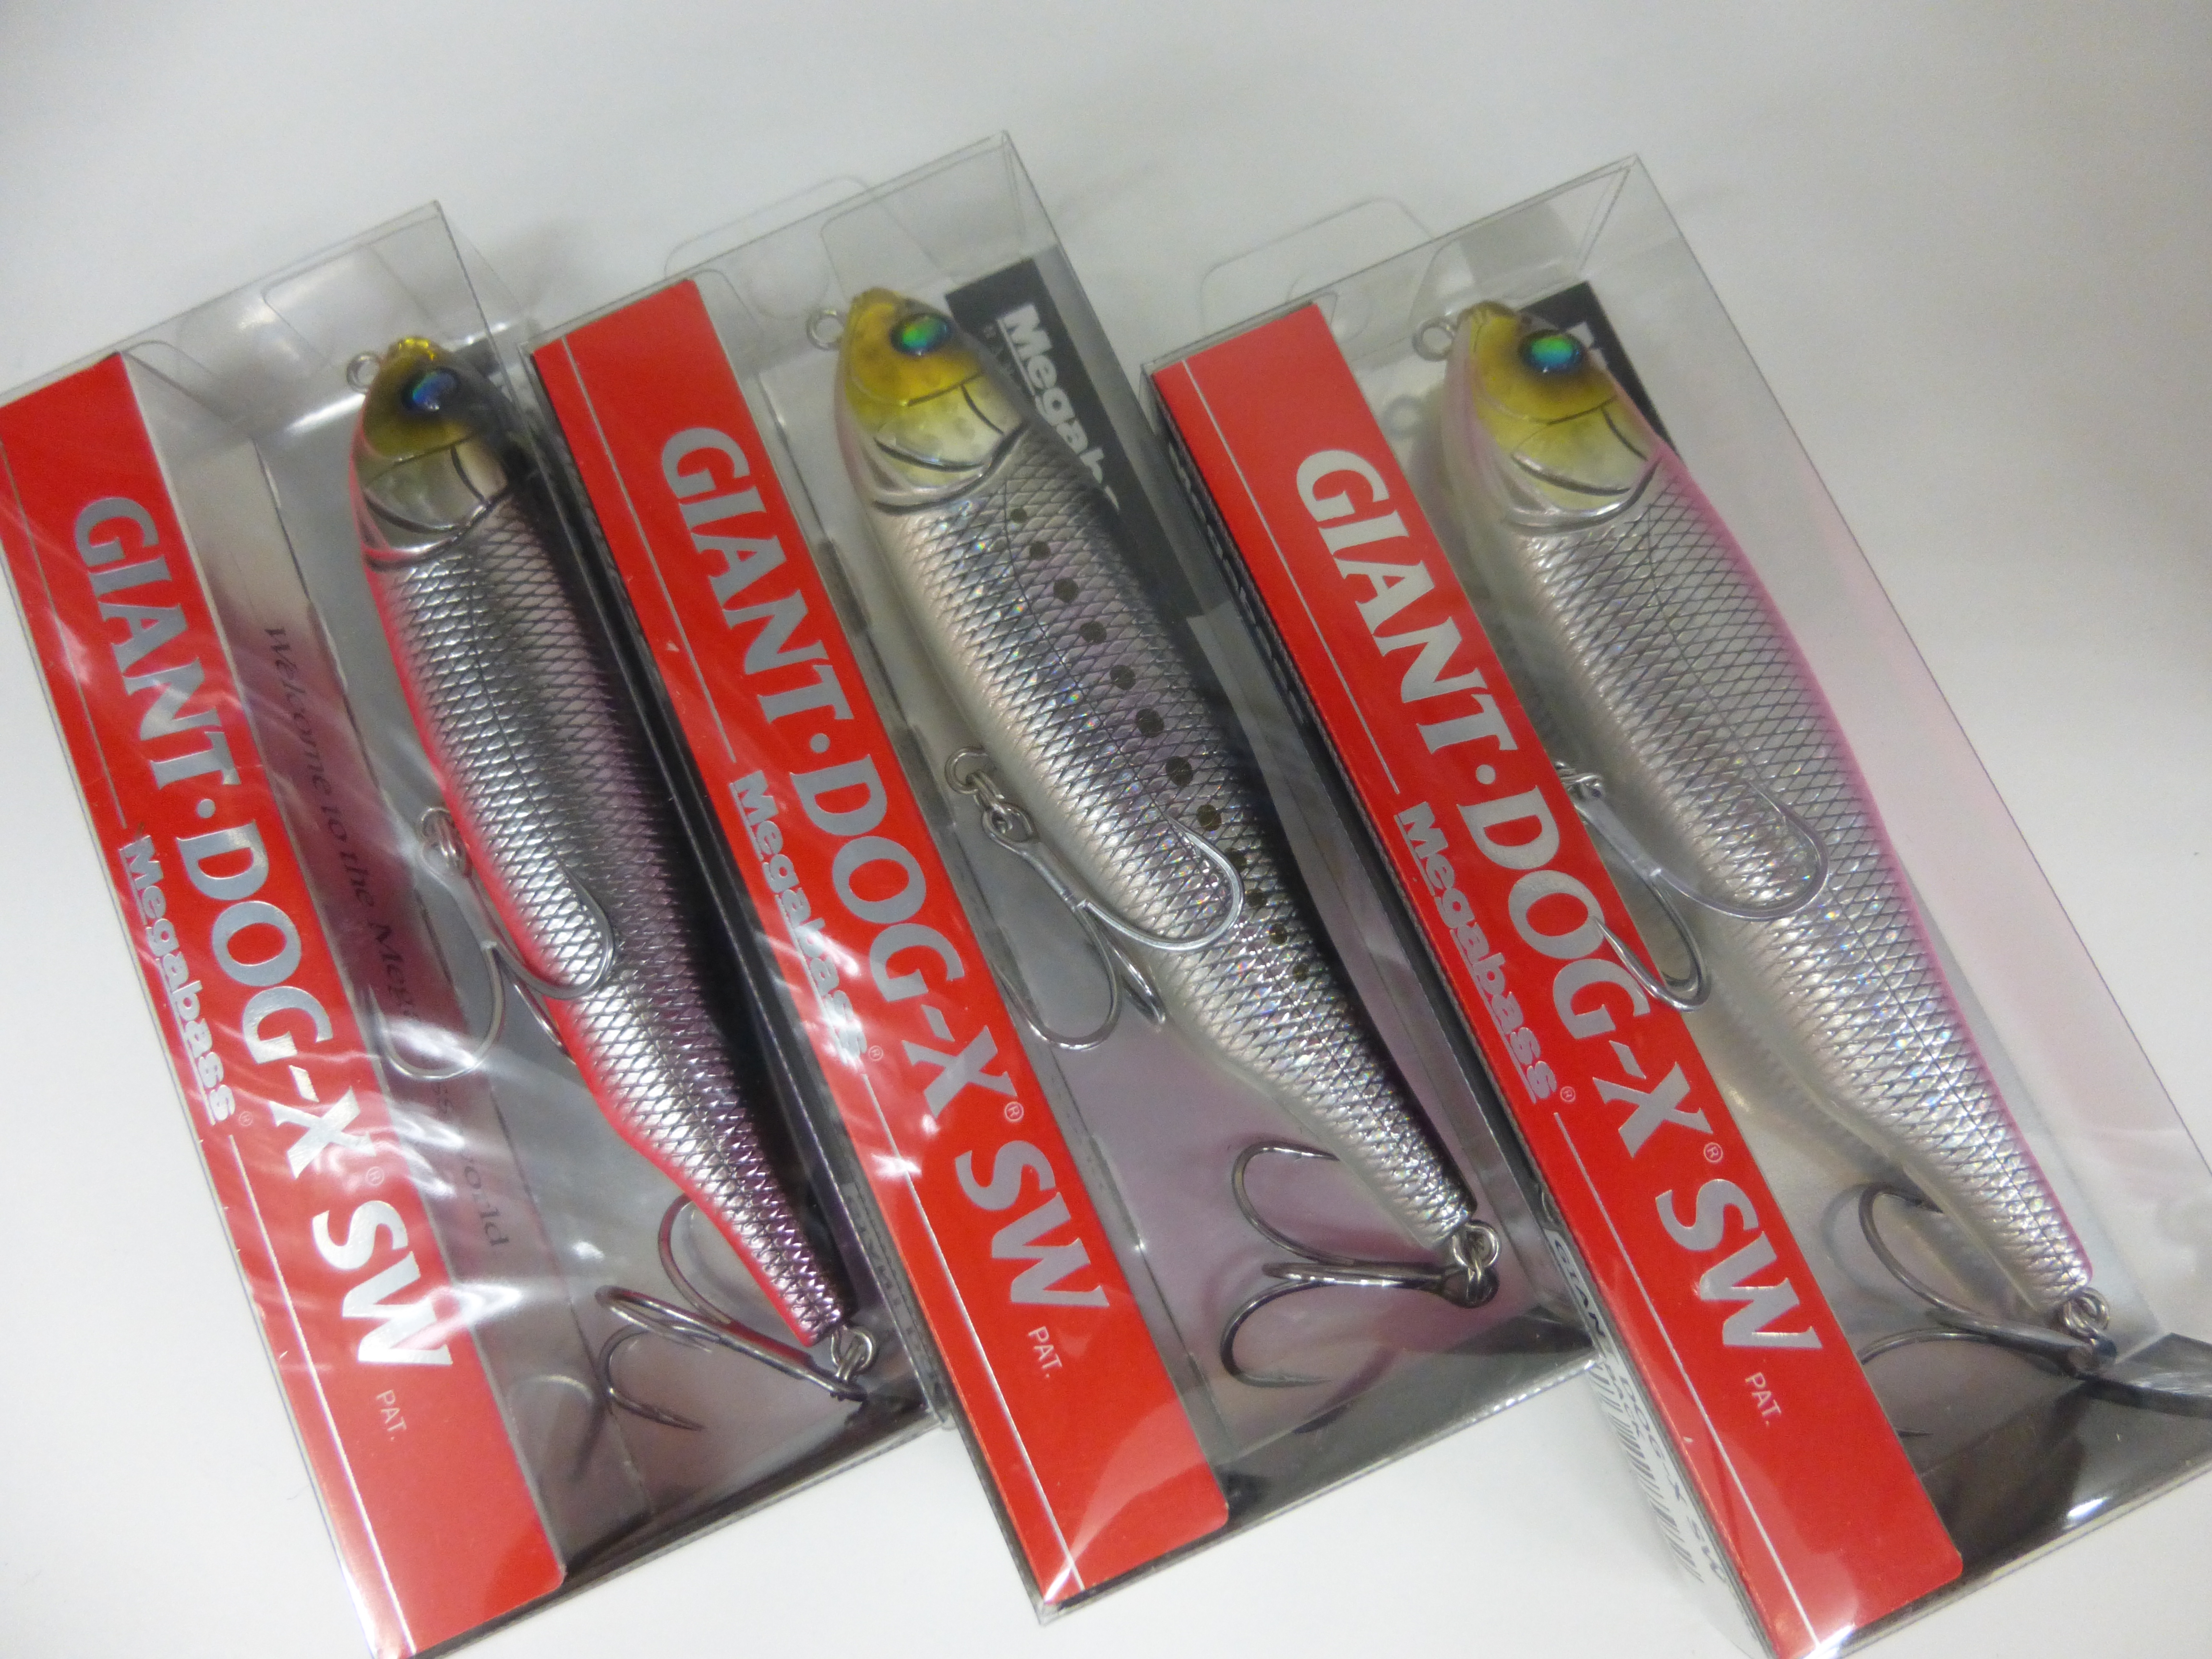 High Speed Daisy Chain Savage 15 Plomero Wahoo Lure by MagBay Lures